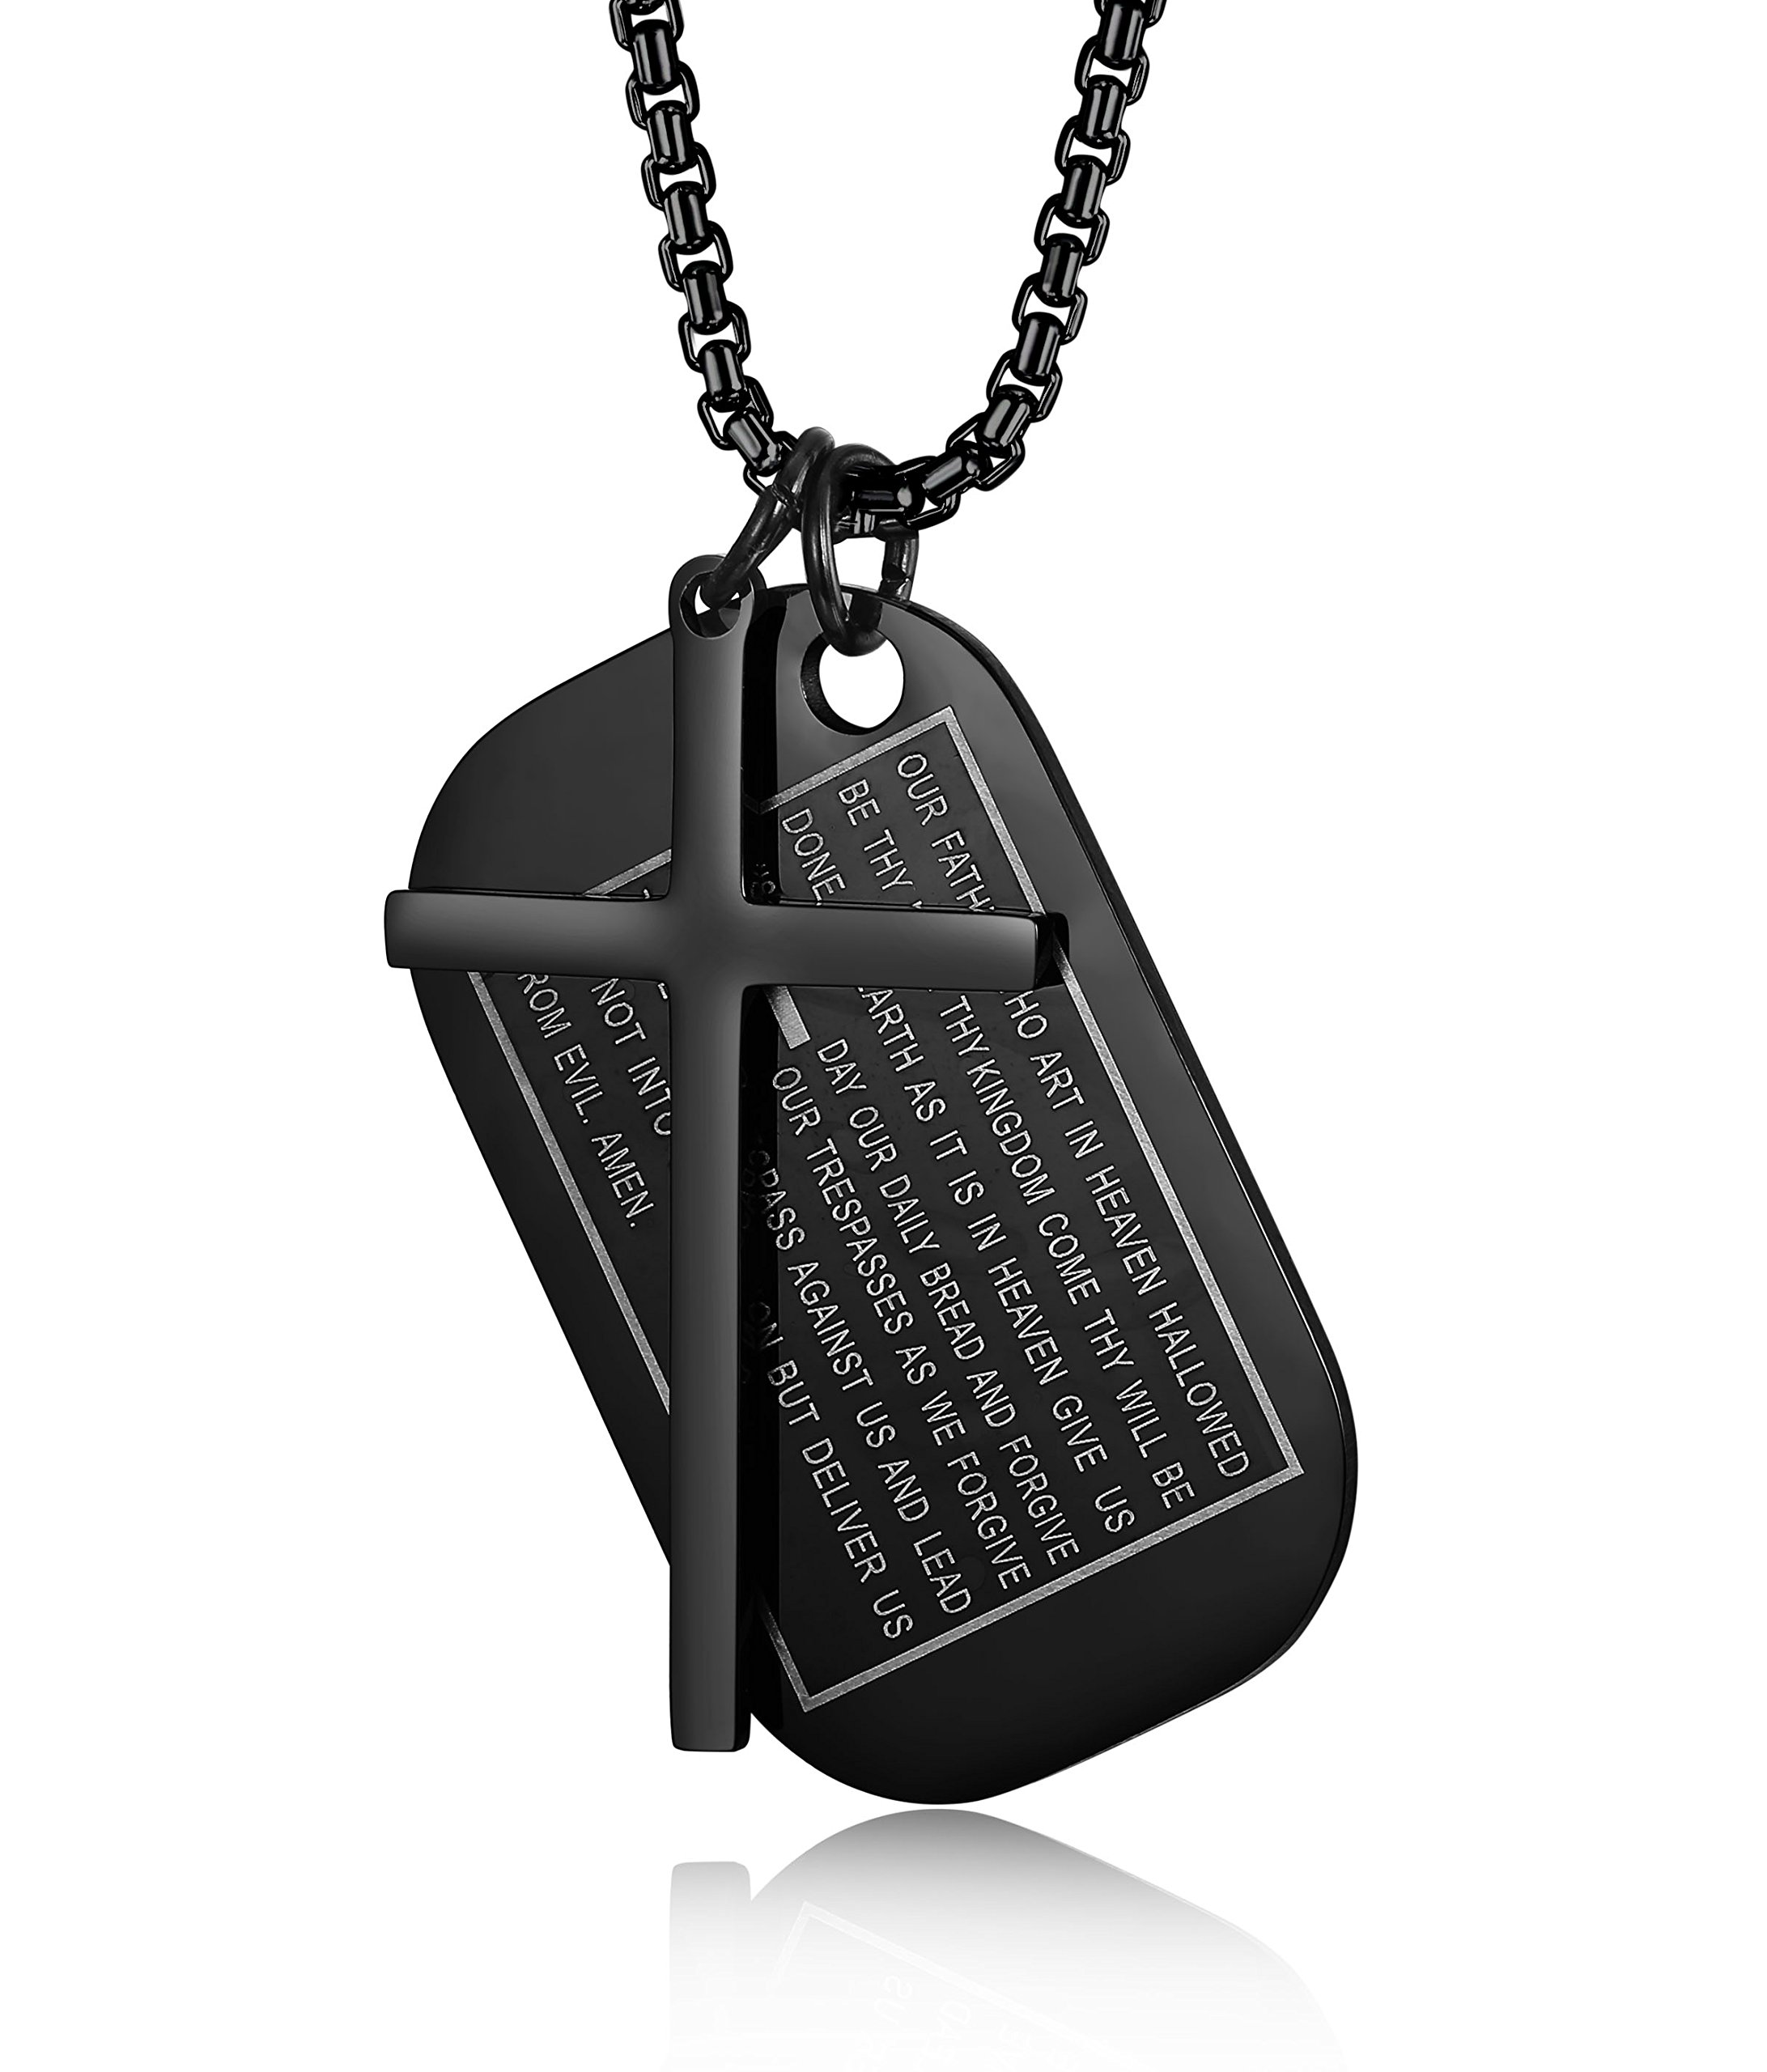 Jstyle Stainless Steel Dog Tags Cross Necklaces for Men Prayer Cross Necklace Military Rolo Chain 3mm 24 Inch